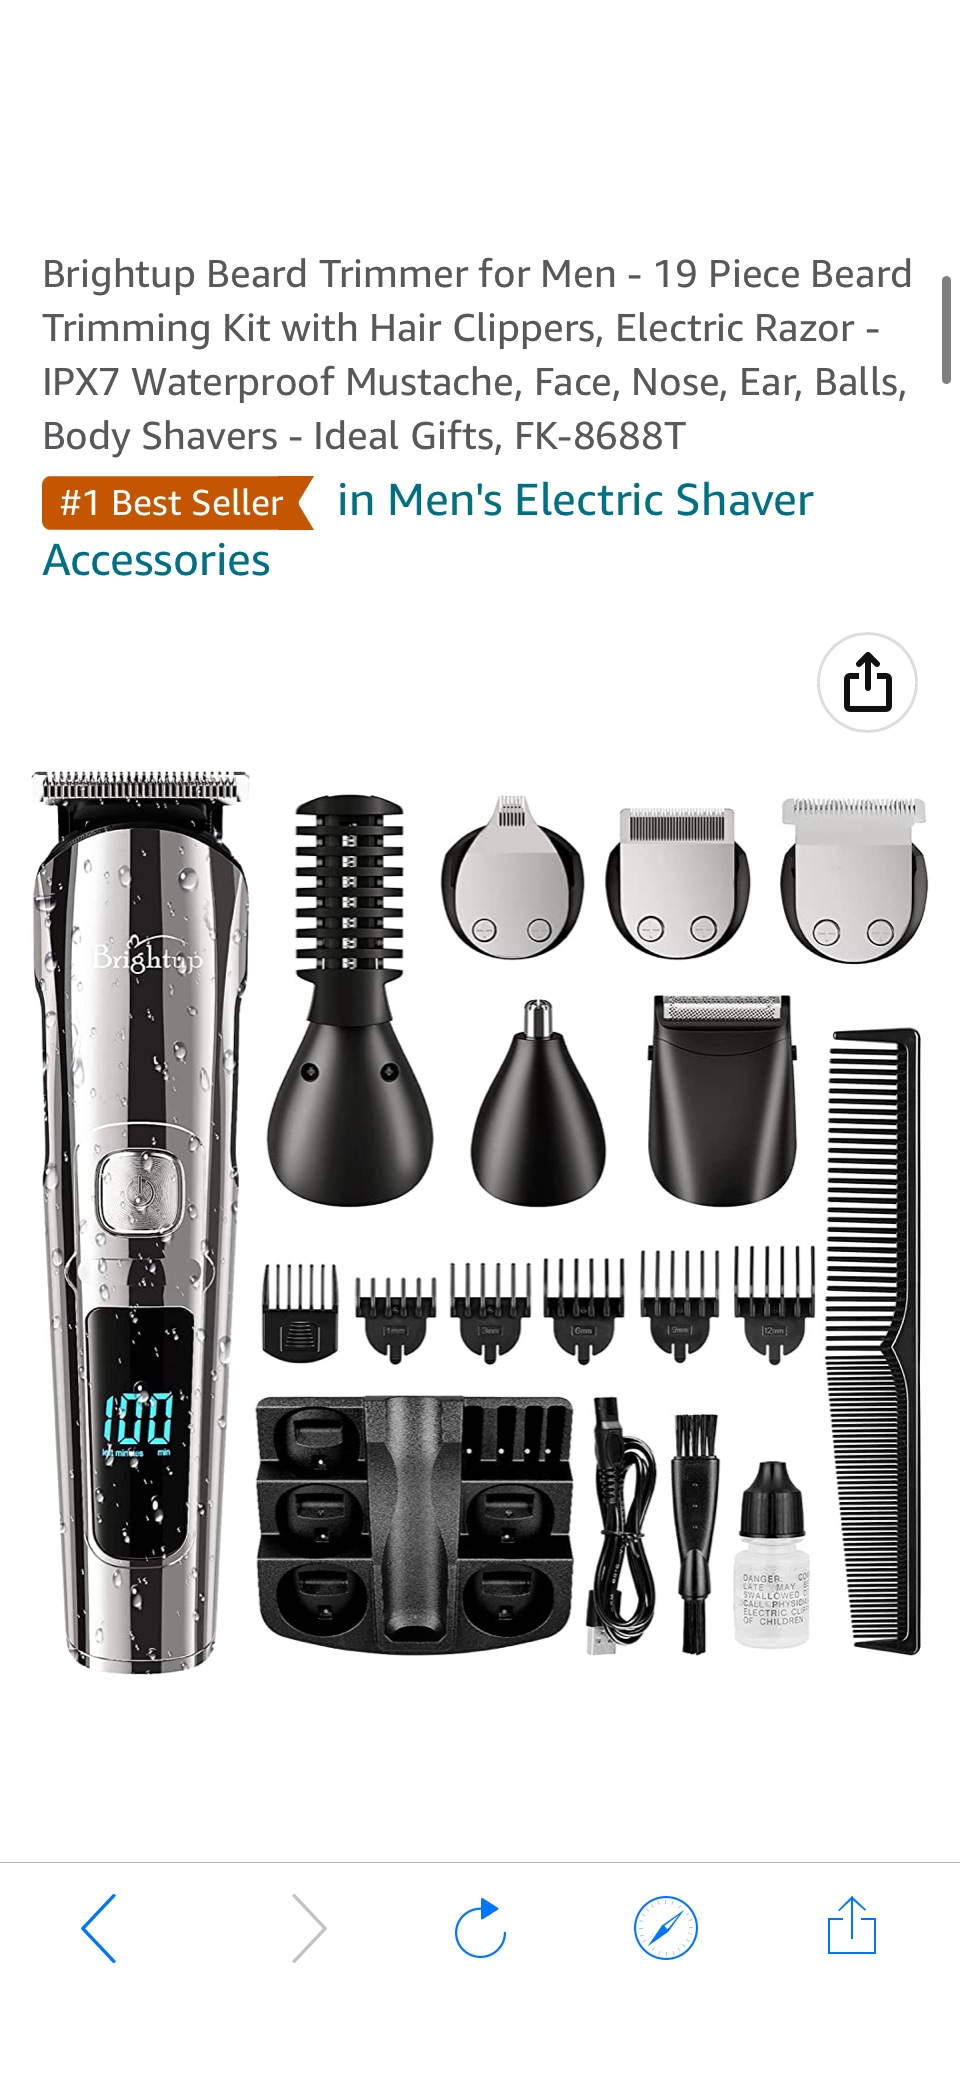 Amazon.com: Brightup Beard Trimmers Hair Clippers Body Hair Trimmers Storage Case Gifts for Men : Beauty & Personal Care原价58.99